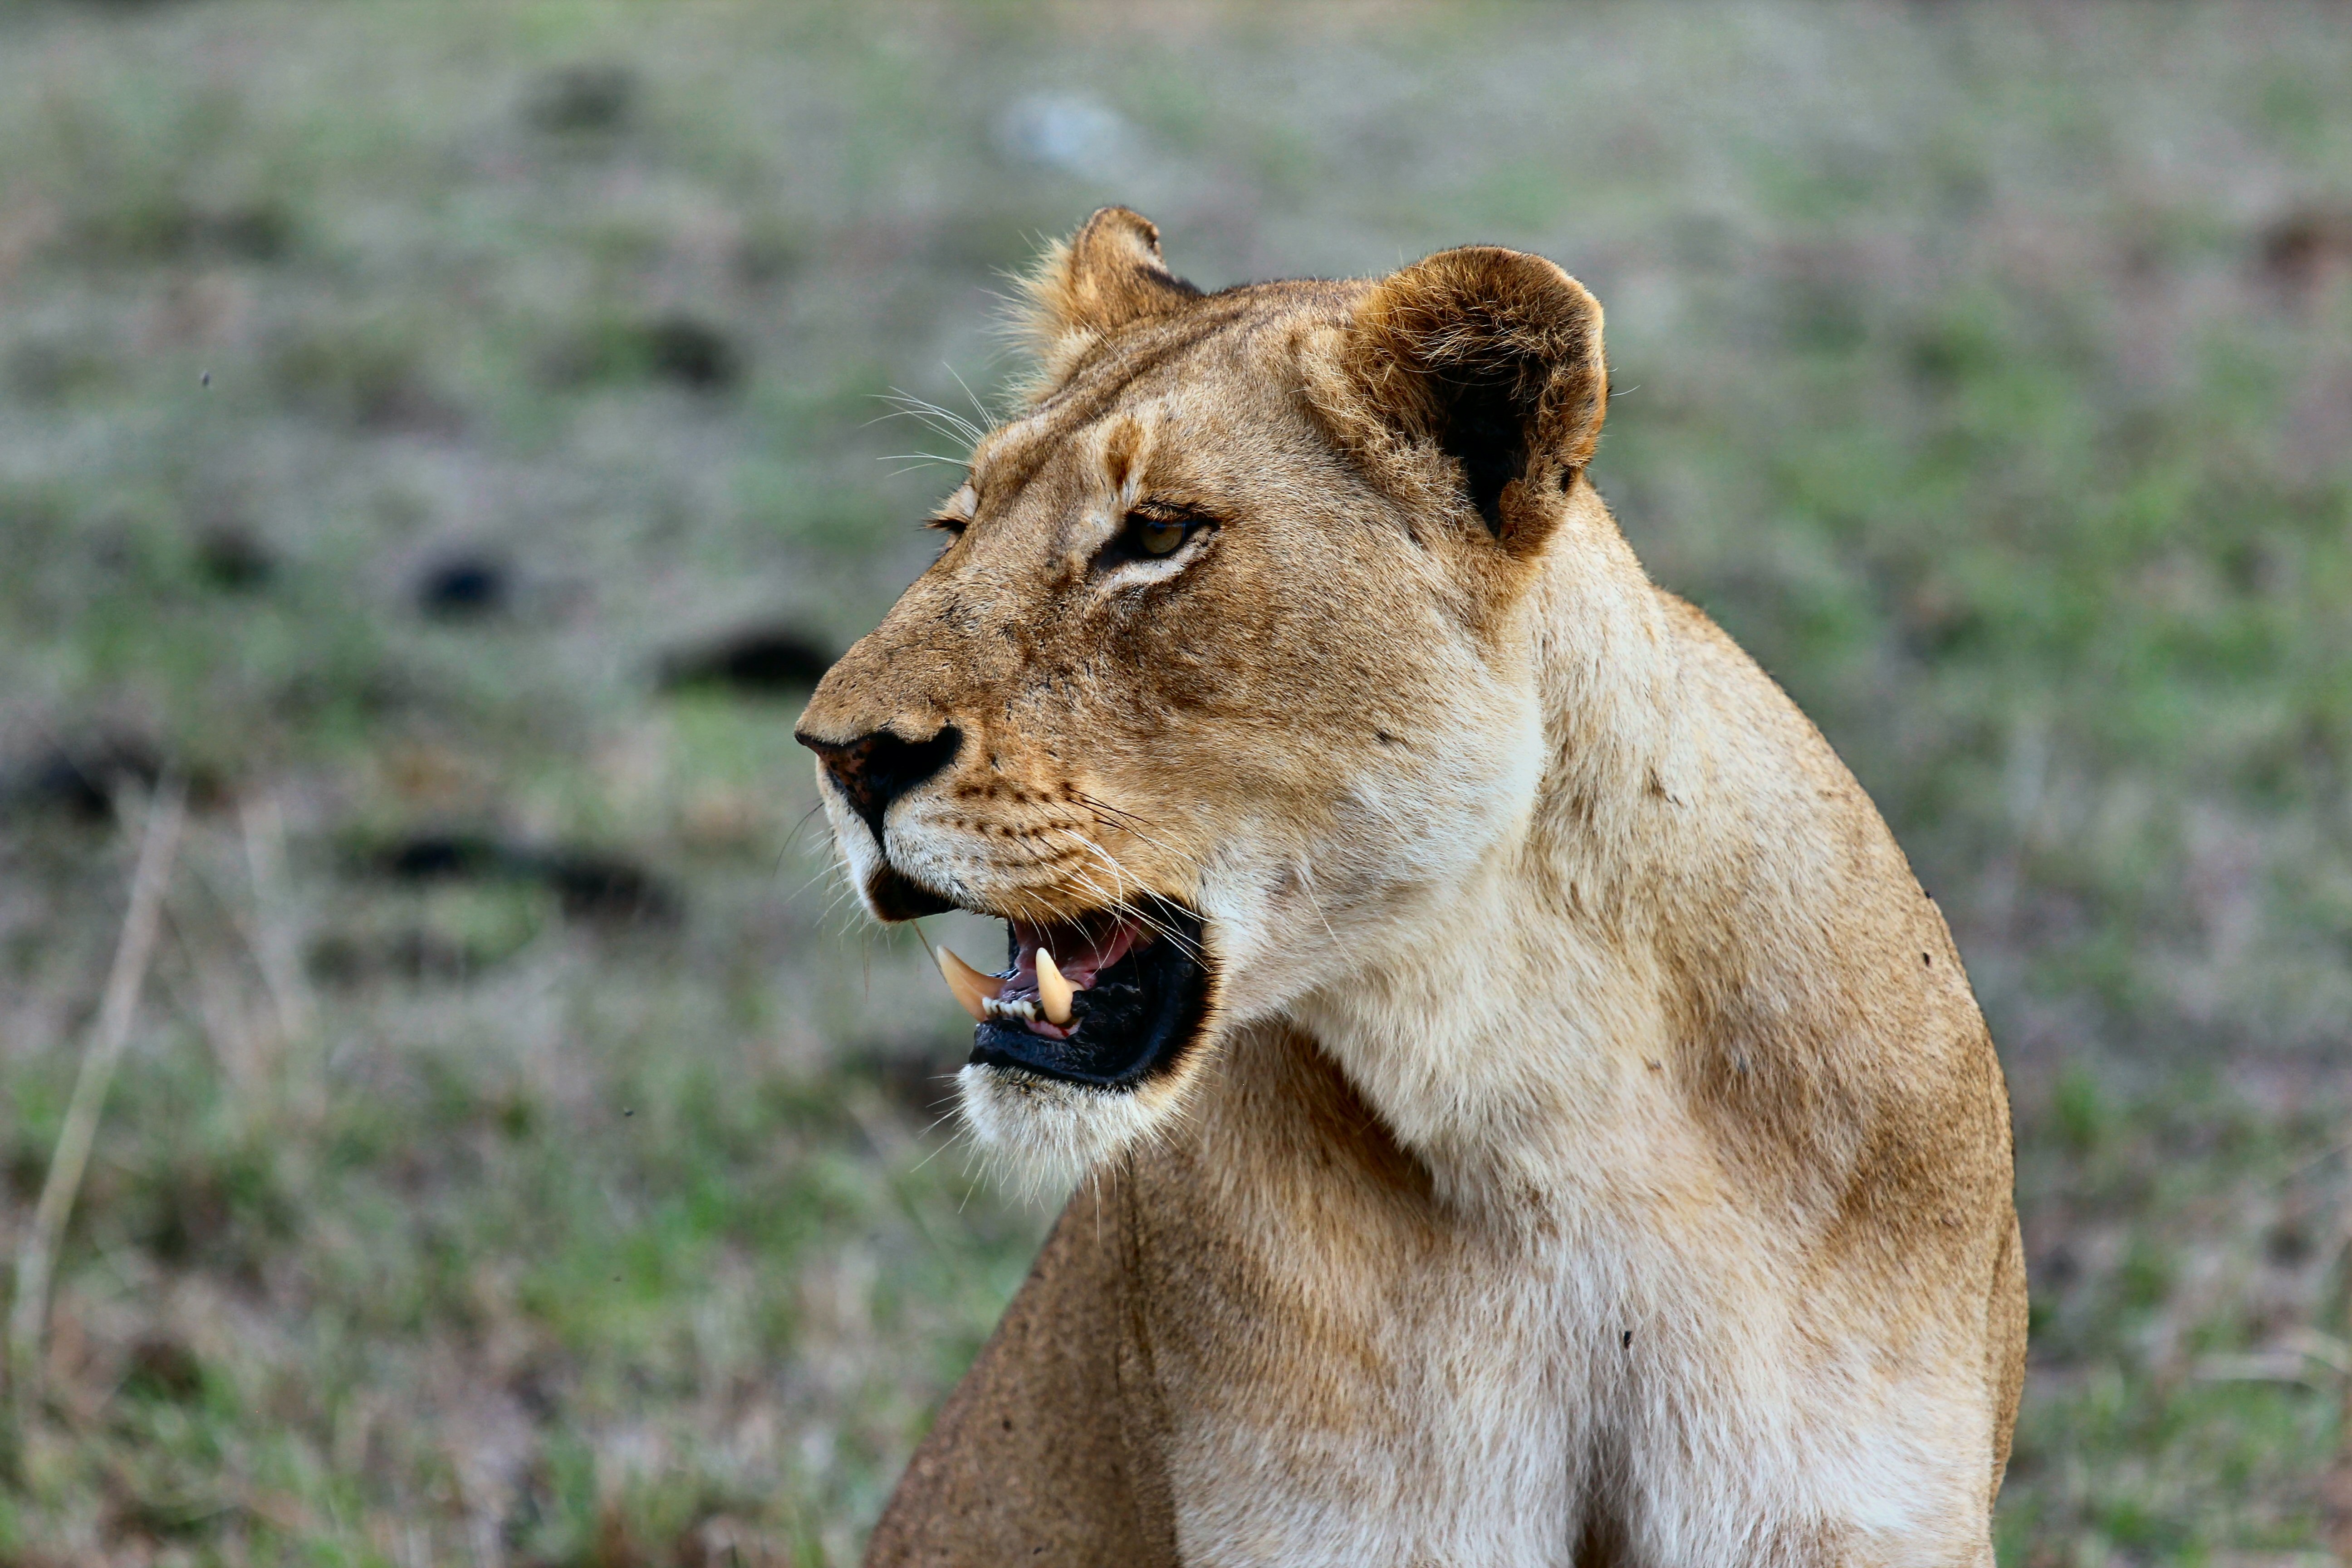 The lioness decided to catch her breath after chasing the antelope